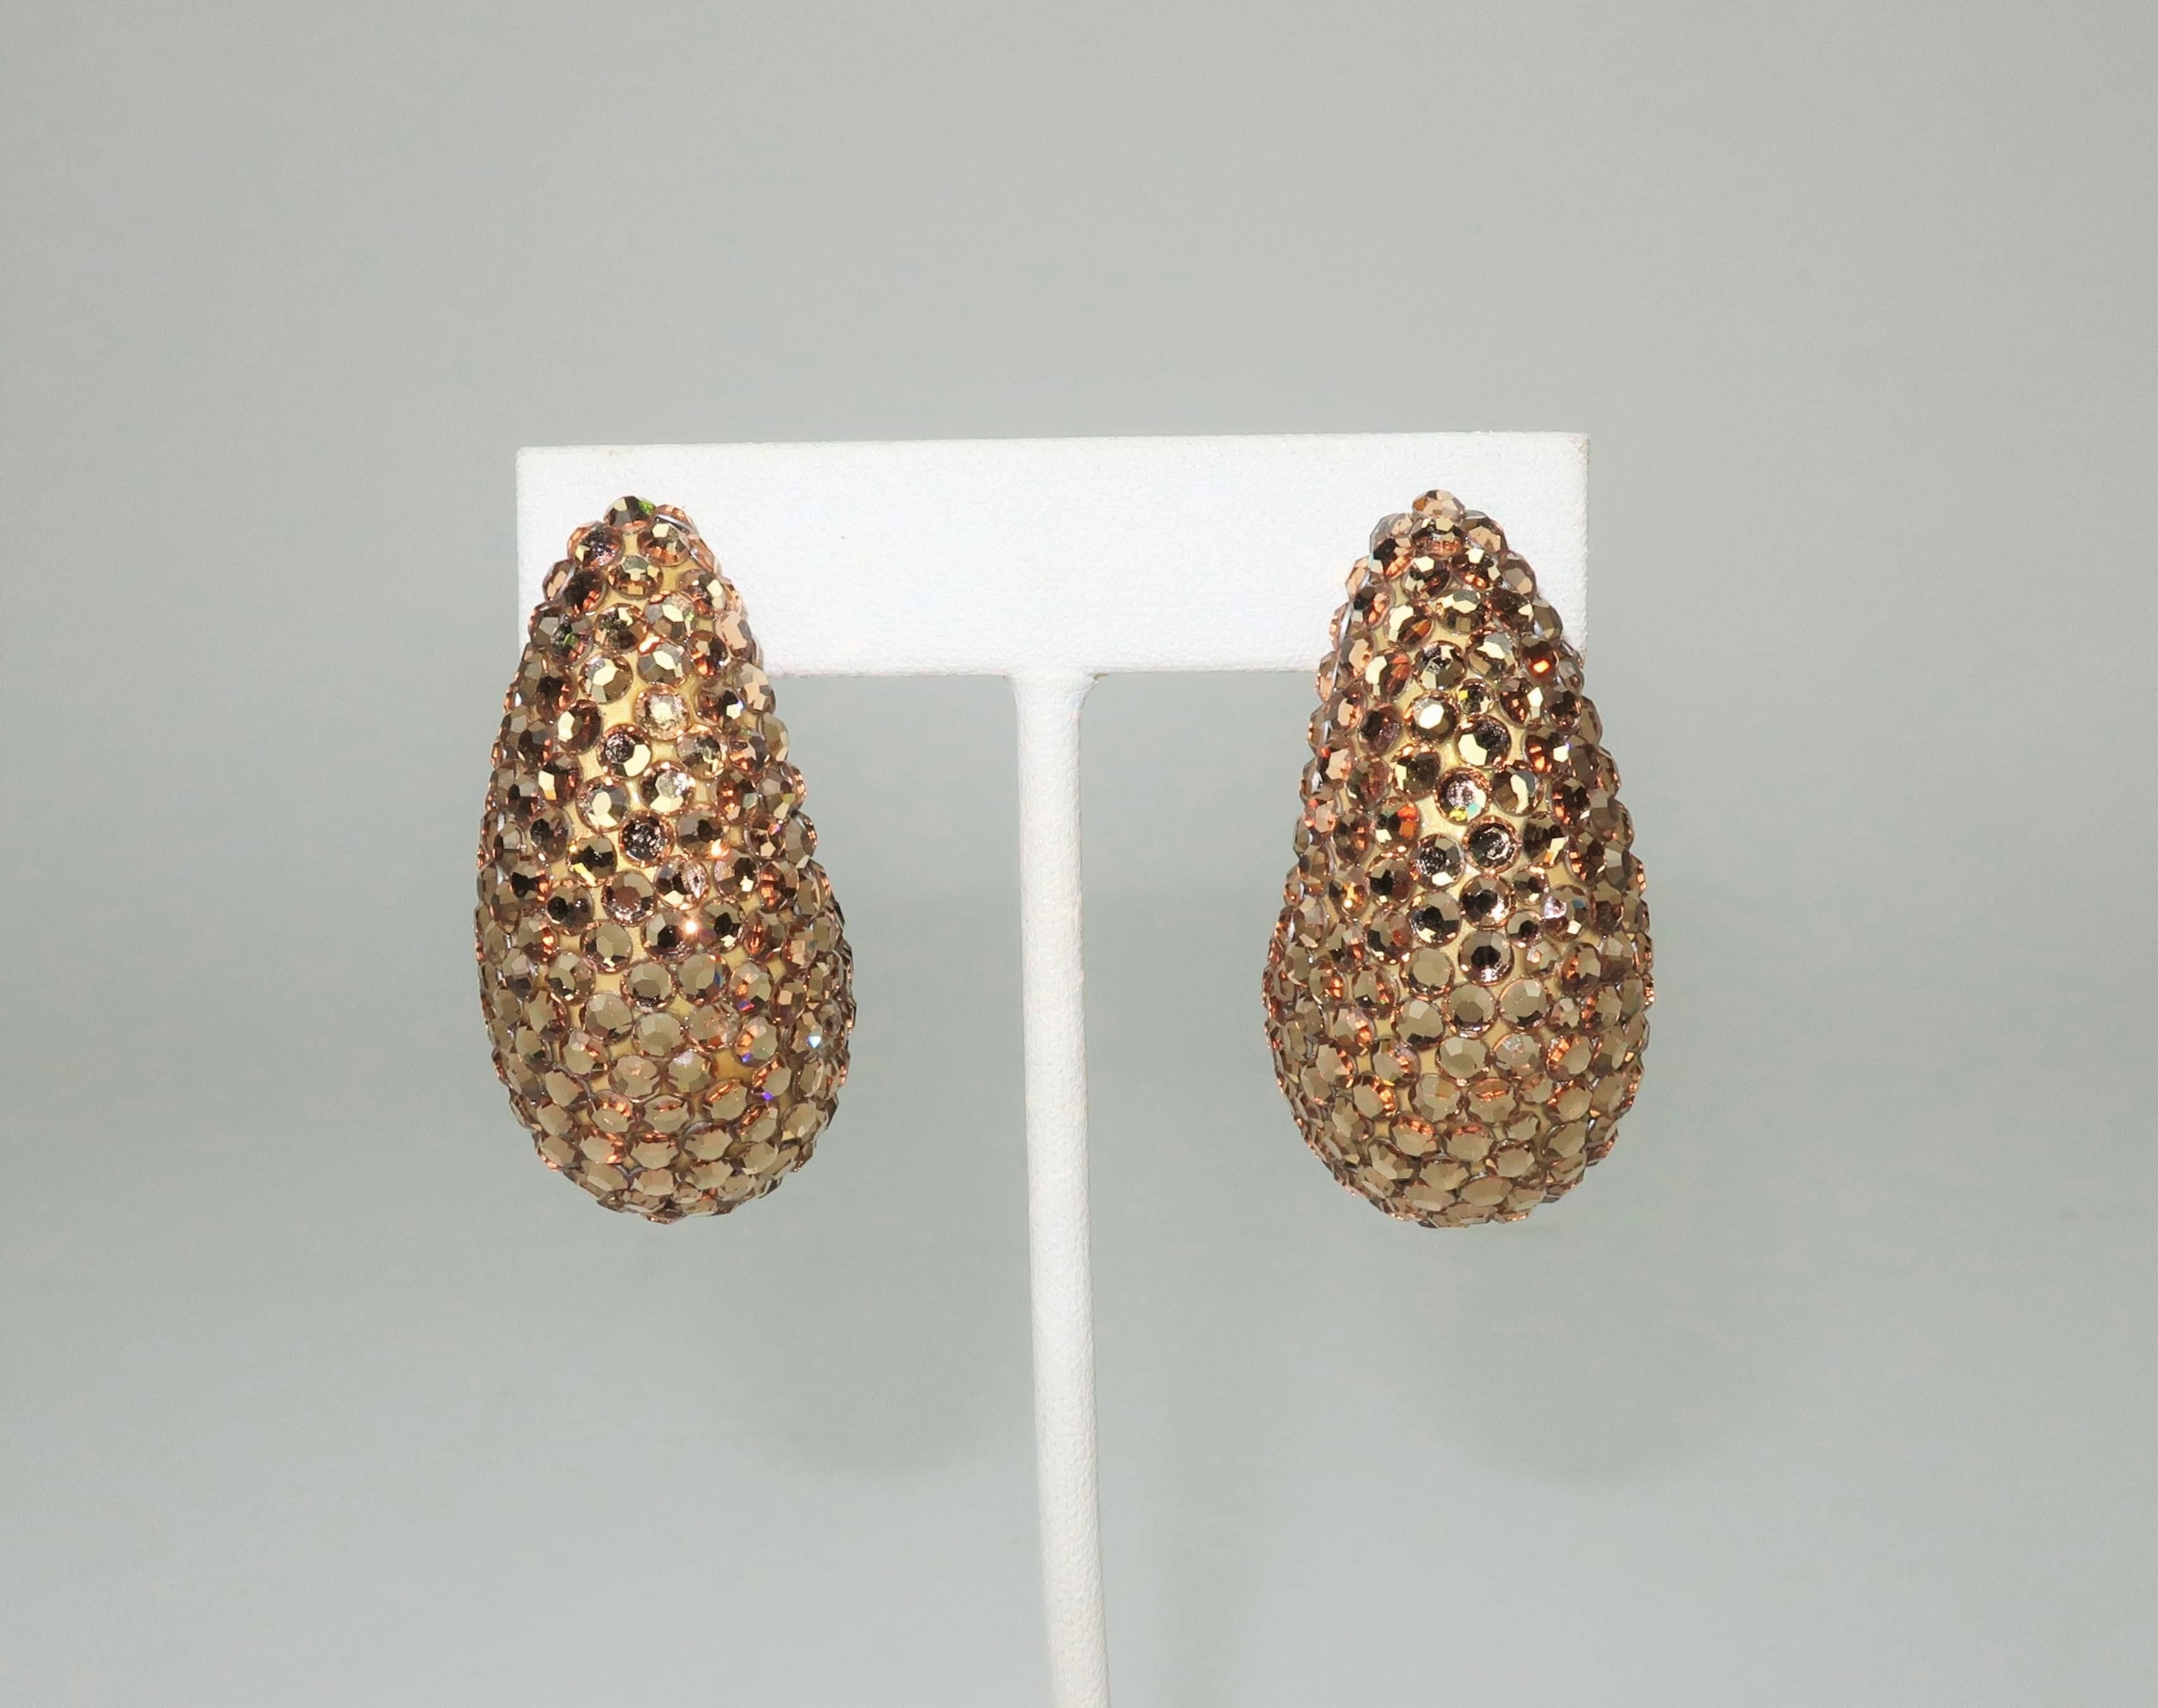 Glorious golden perfection!  These 1980's Richard Kerr earrings are mesmerizing.  The nautilus shaped clip ons are fully encrusted in pave crystals that catch the light at every turn.  Each earring measures 1.88" long x .88" wide x